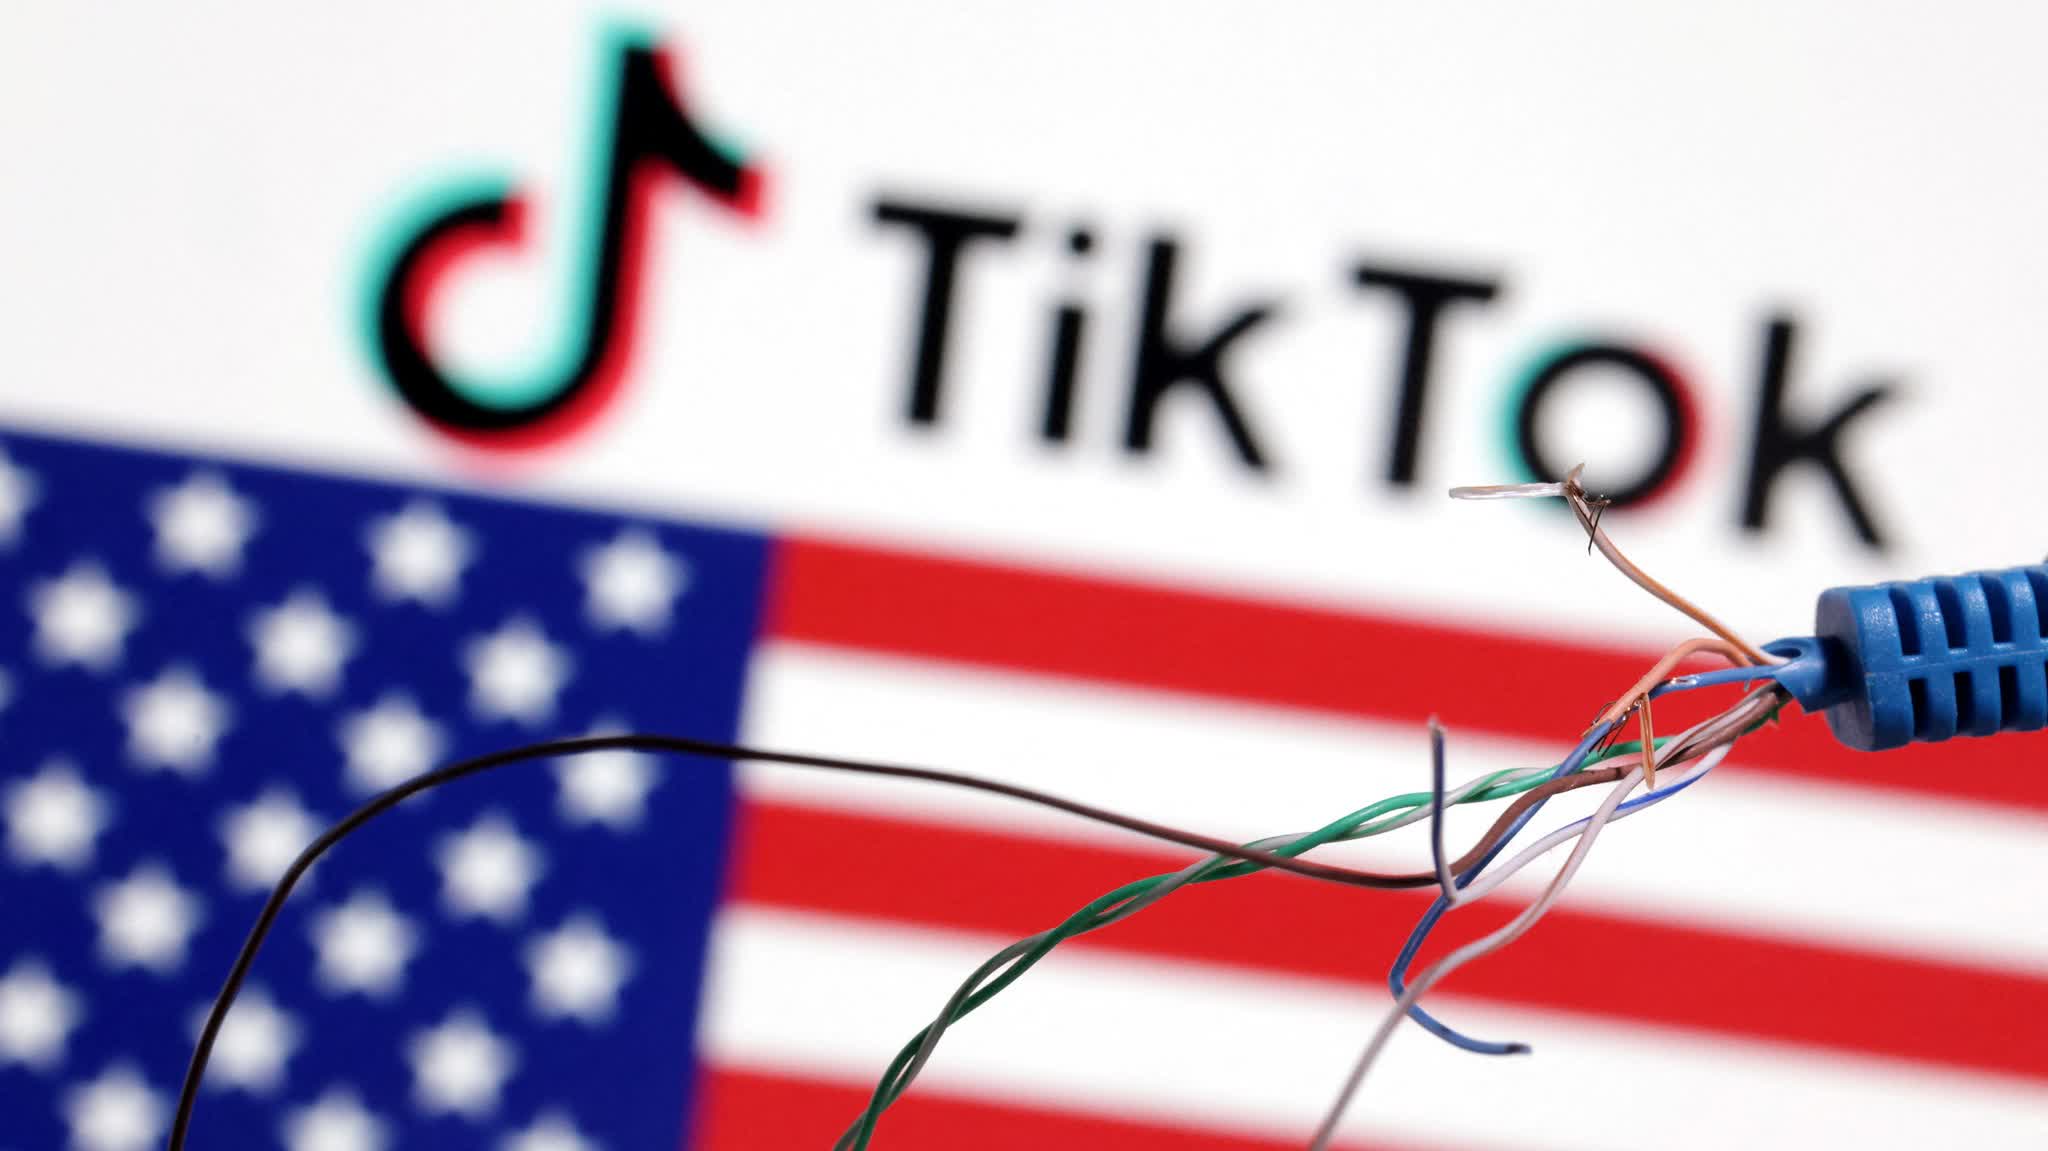 US Senate passes bill forcing ByteDance to sell TikTok or face ban